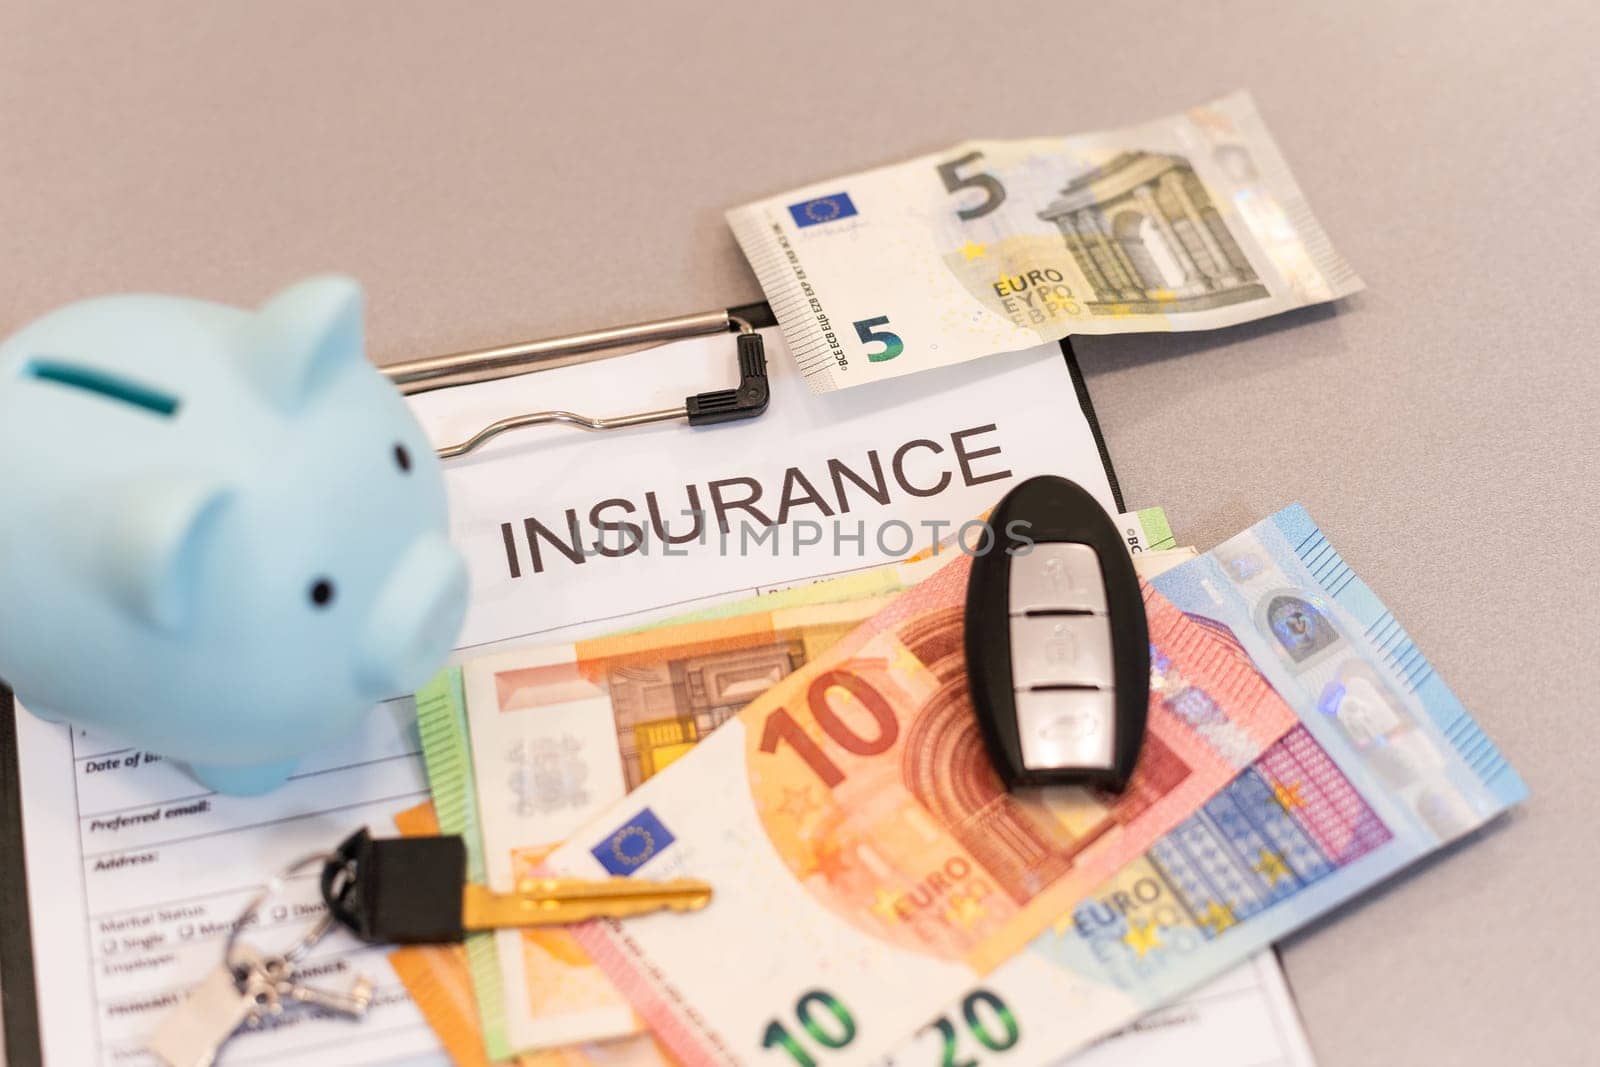 insurance form, folders, piggy bank and money by Andelov13